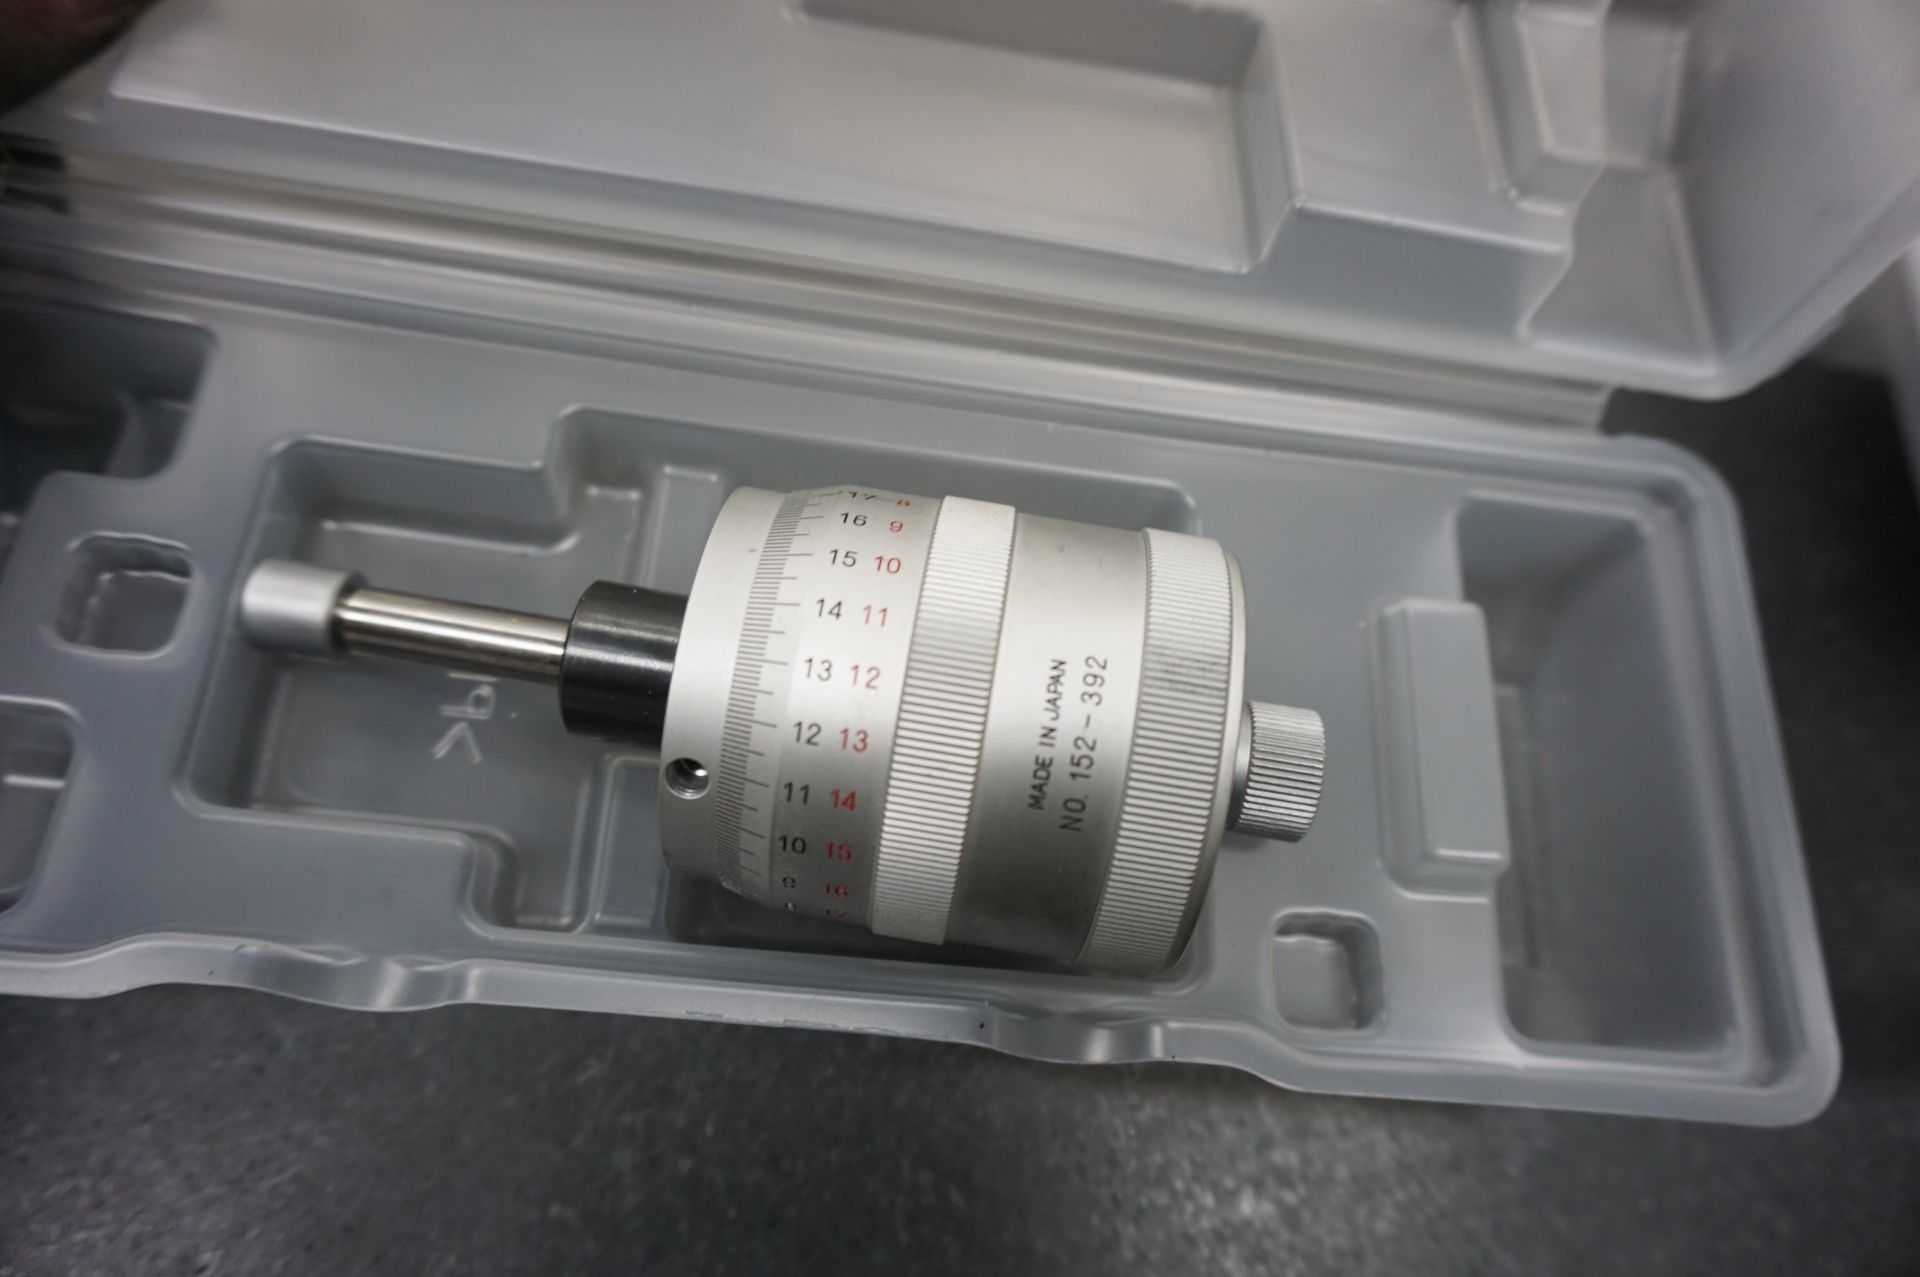 LOT TO INCLUDE: (1) MITUTOYO DIGIMATIC 164-162 MICROMETER HEAD, (2) MITUTOYO 152-392 MICROMETER - Image 3 of 5